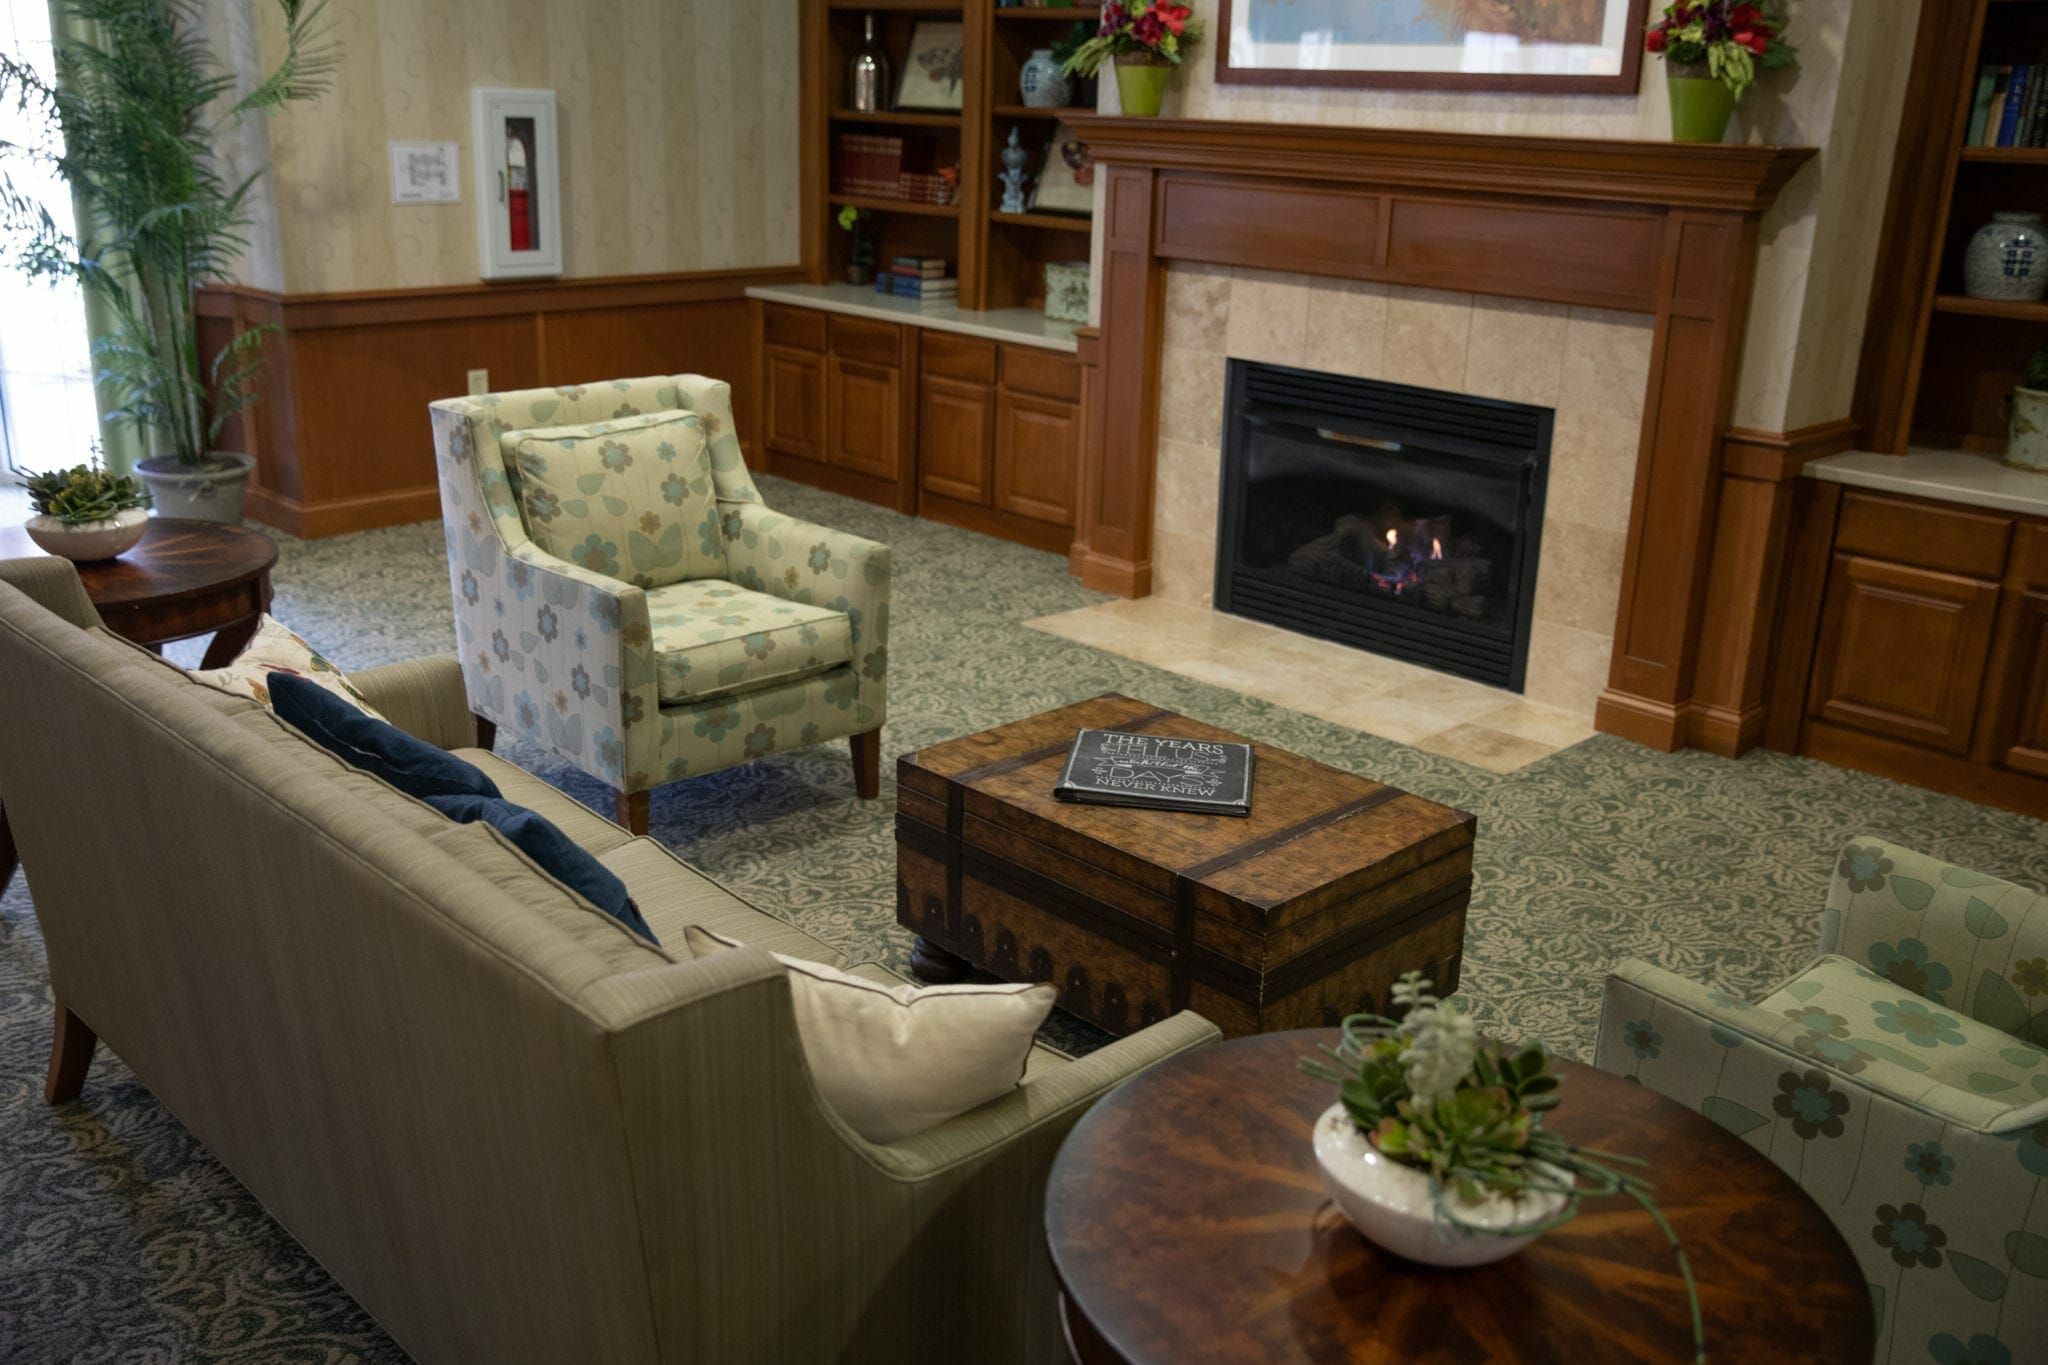 Allisonville Meadows Assisted Living 4